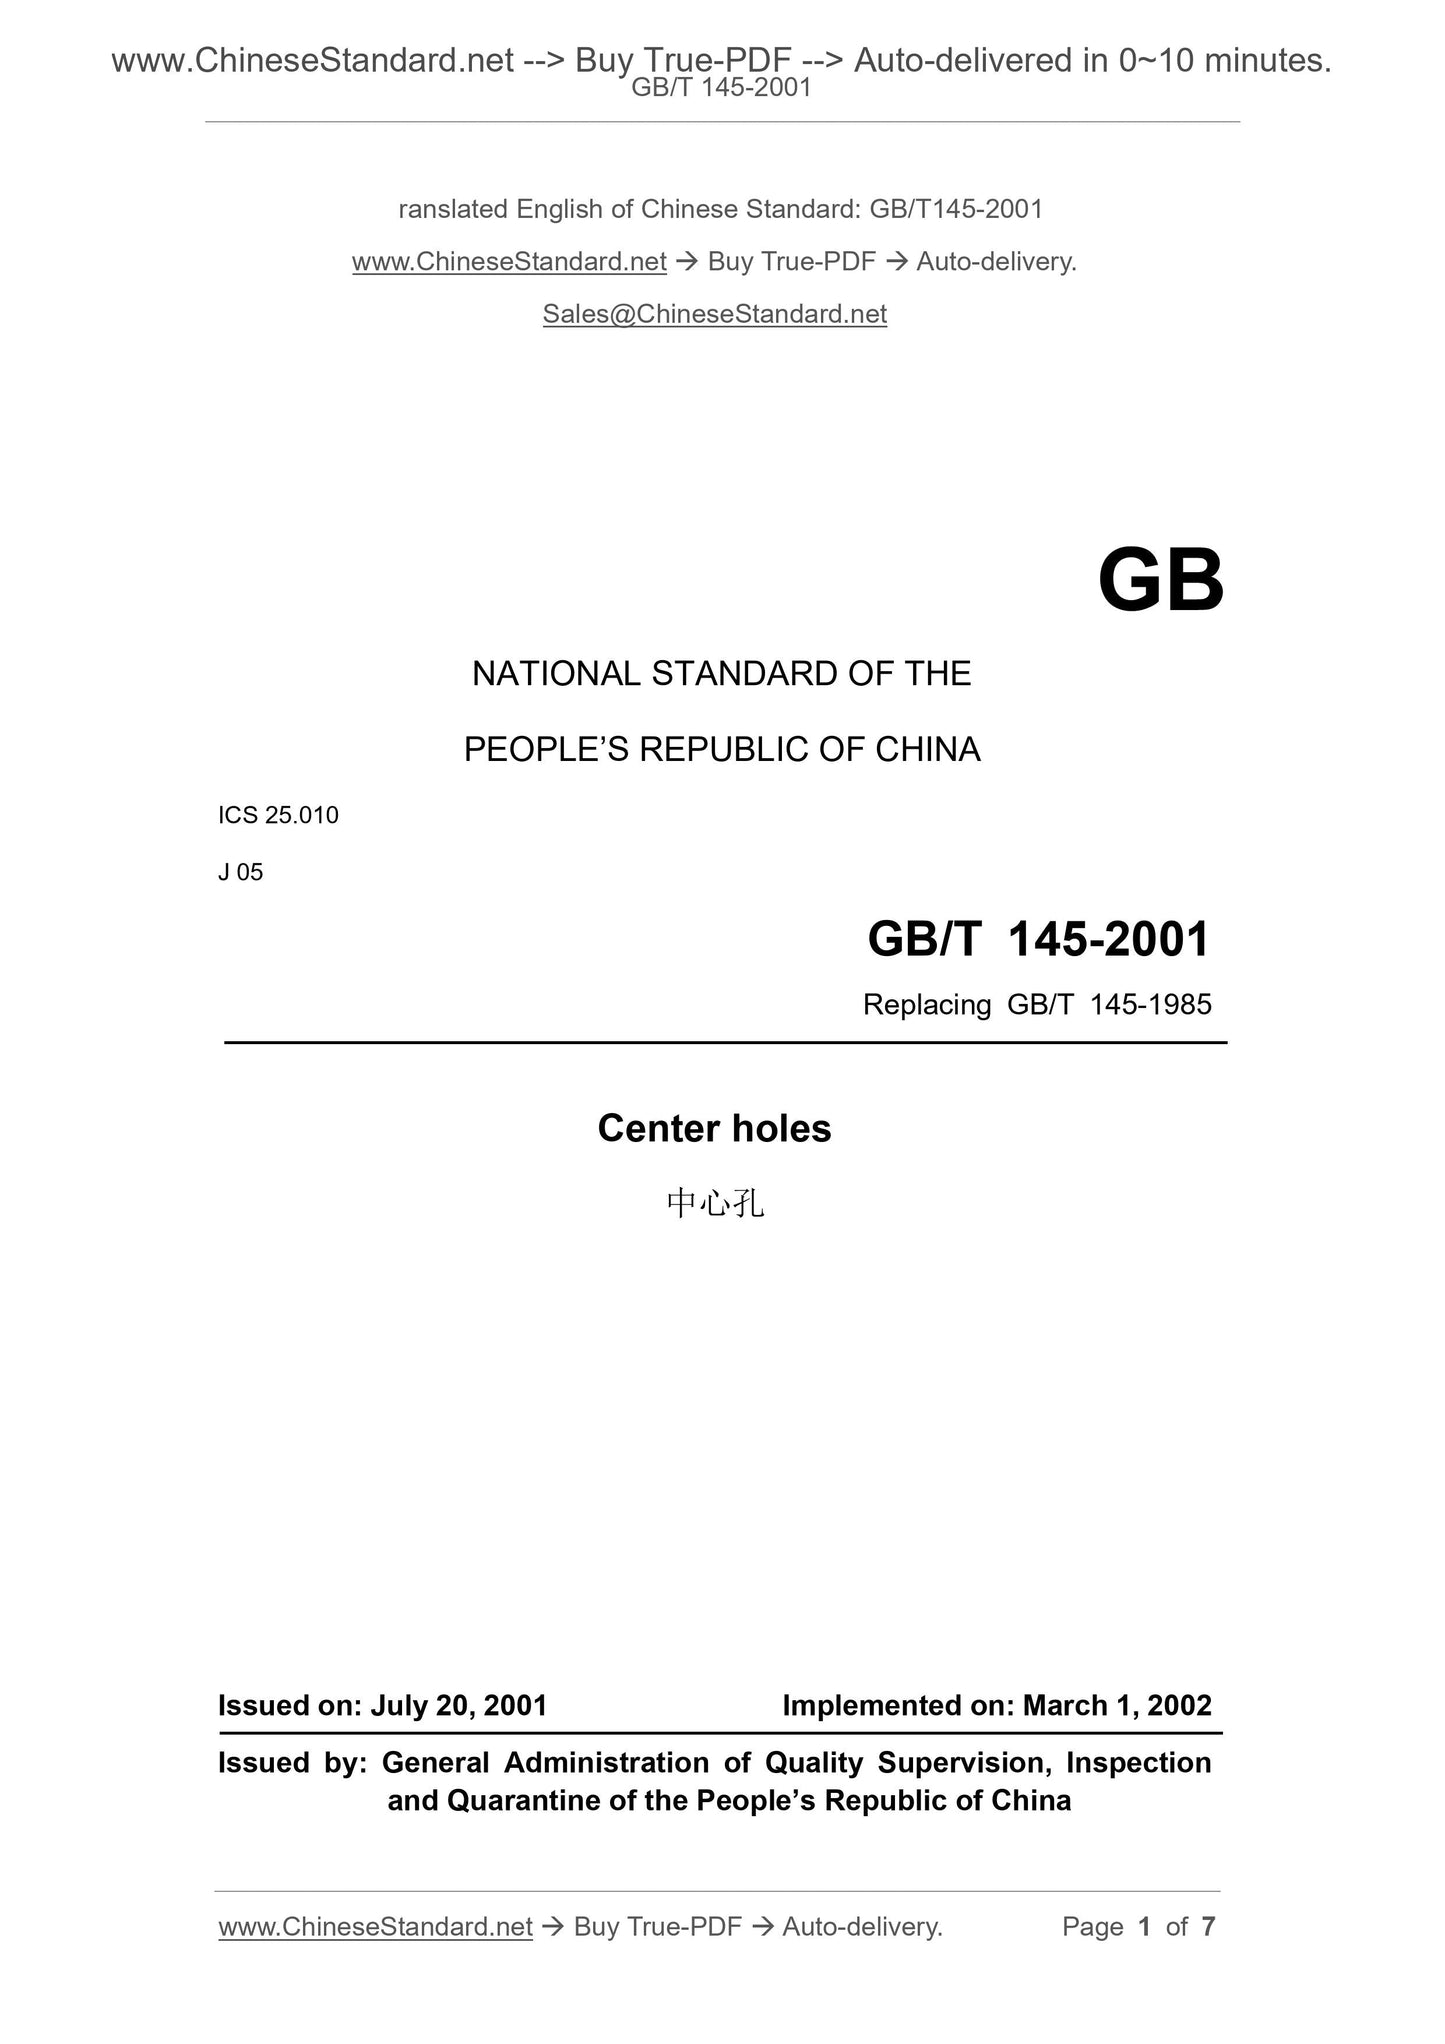 GB/T 145-2001 Page 1